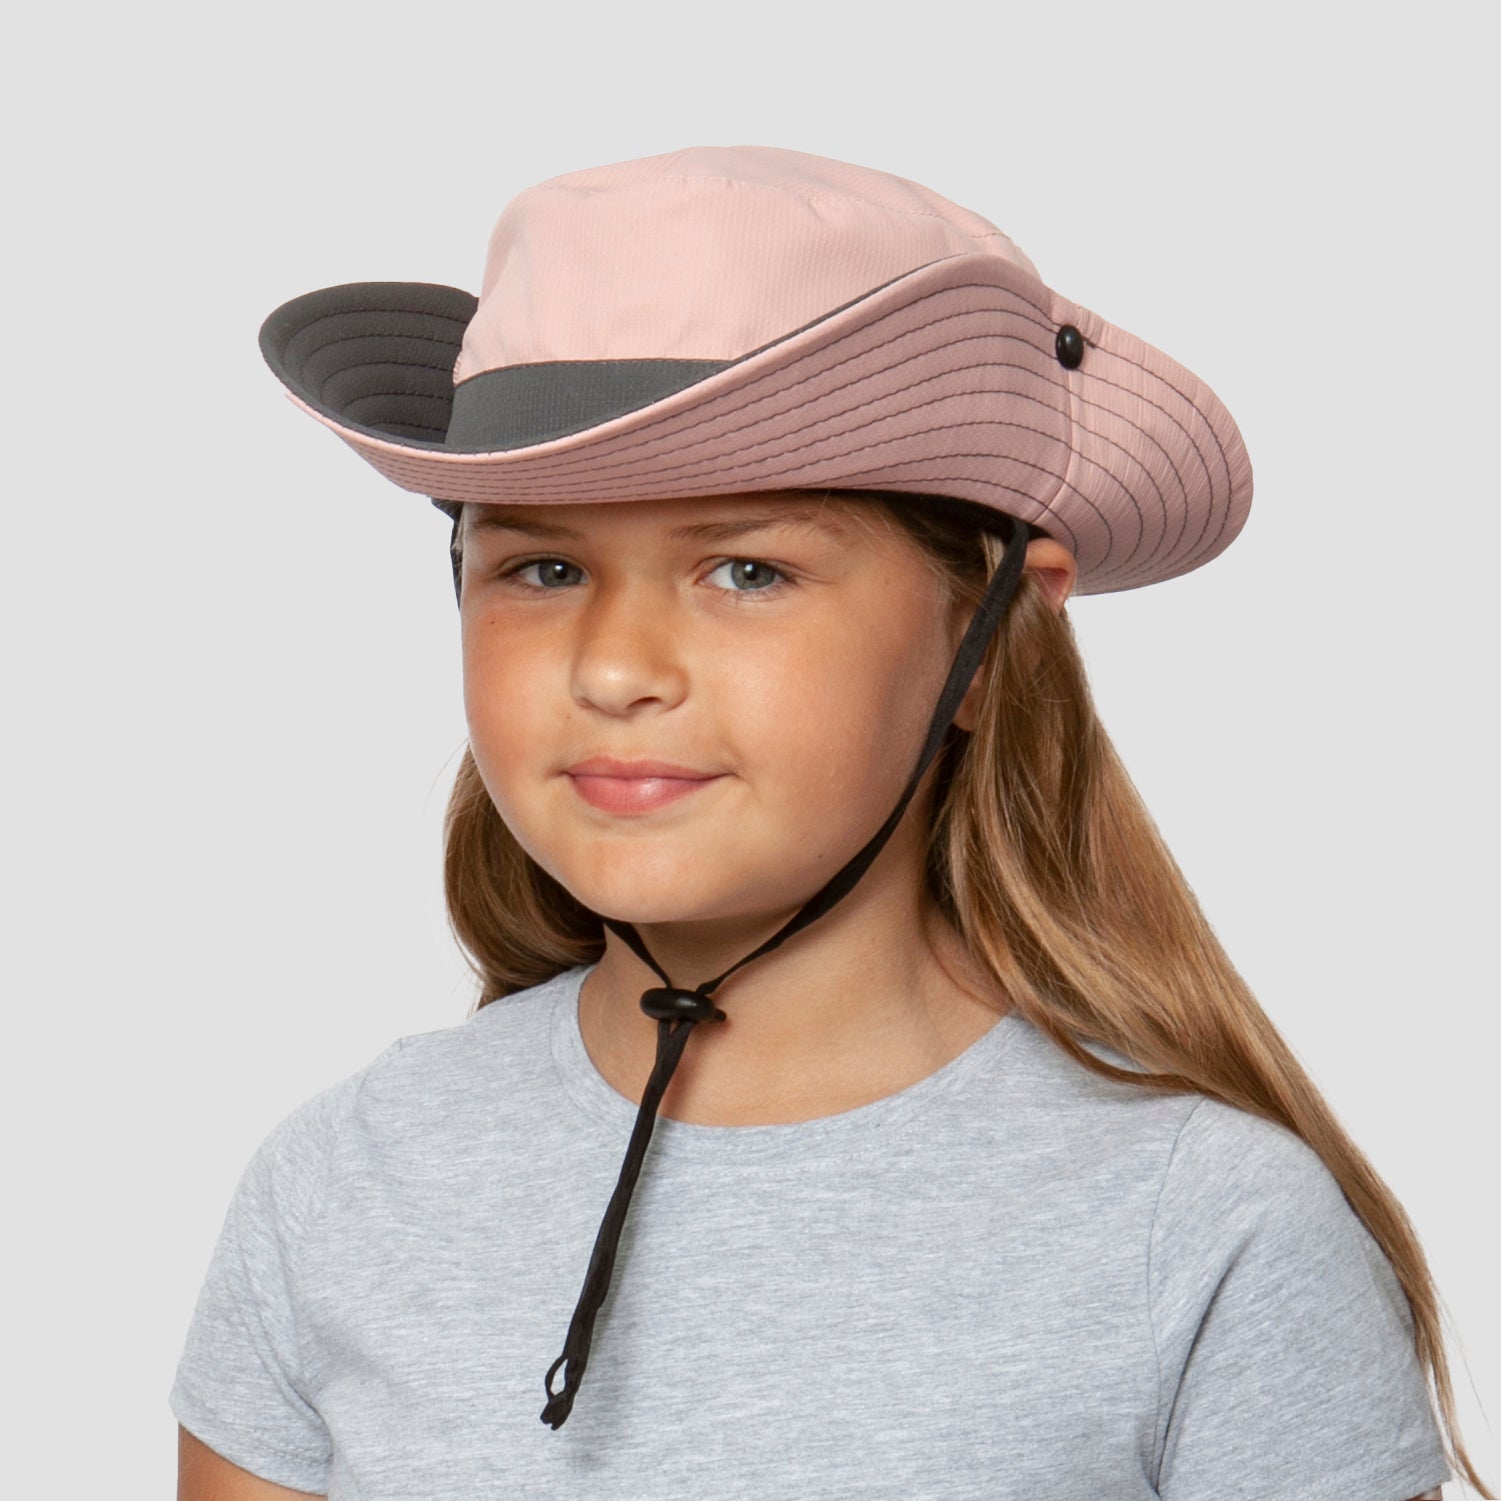 Kids UV Protection Sun Hat [FREE SHIPPING] – GoodYouCo